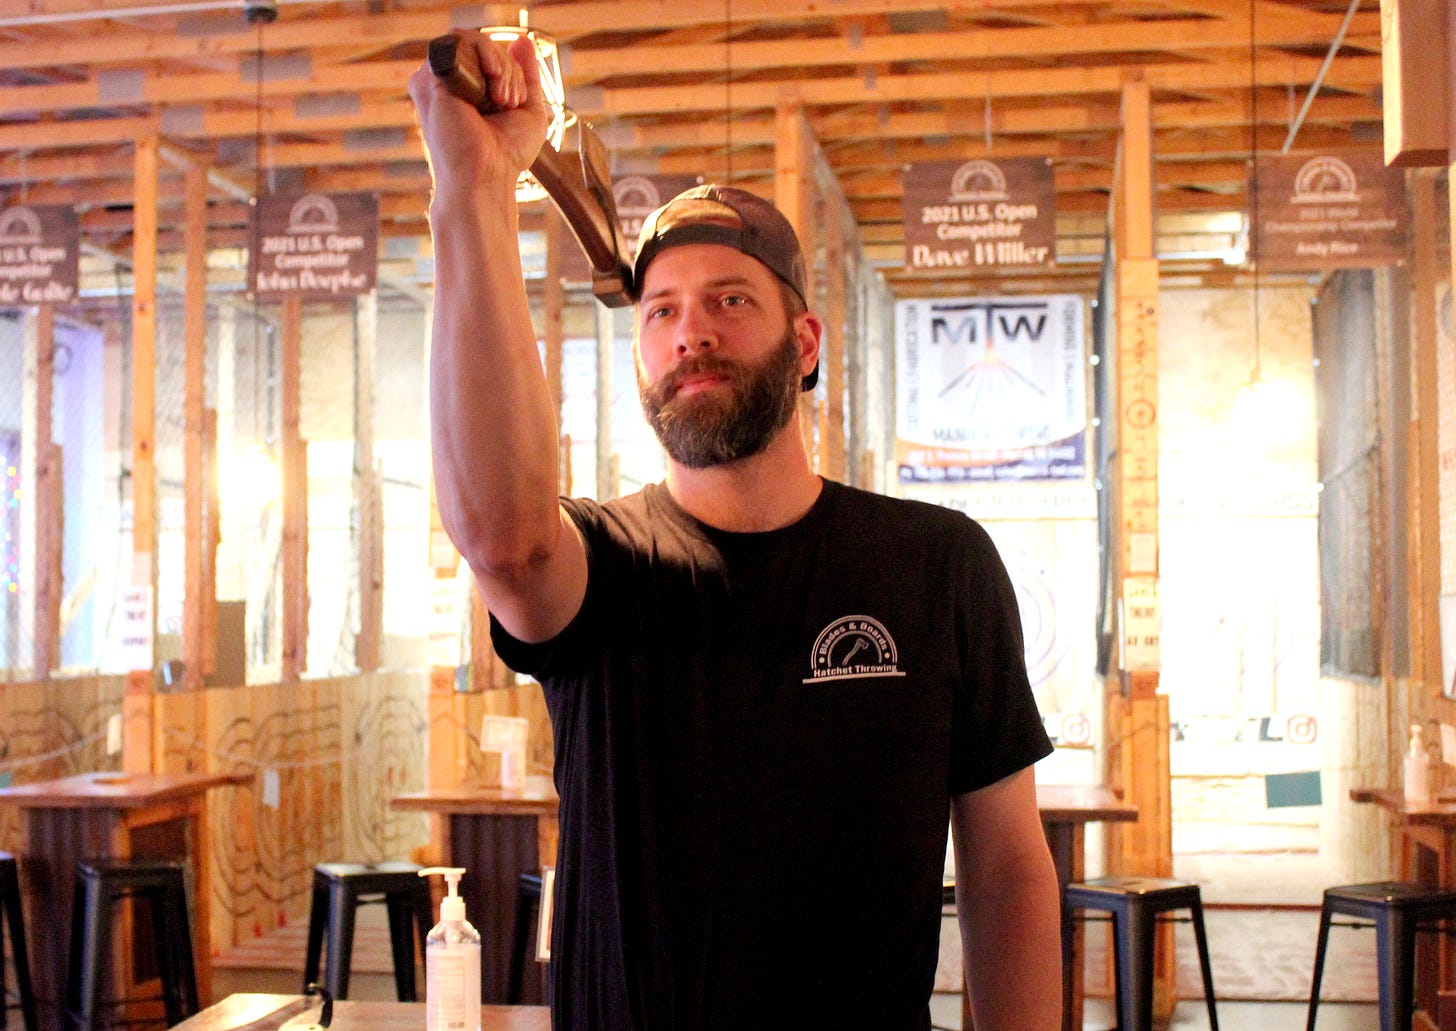 John Doepke of Wausau recently competed in the World Axe and Knife Throwing Championships in Appleton and his story was covered in The Wausau Sentinel by Evan J. Pretzer